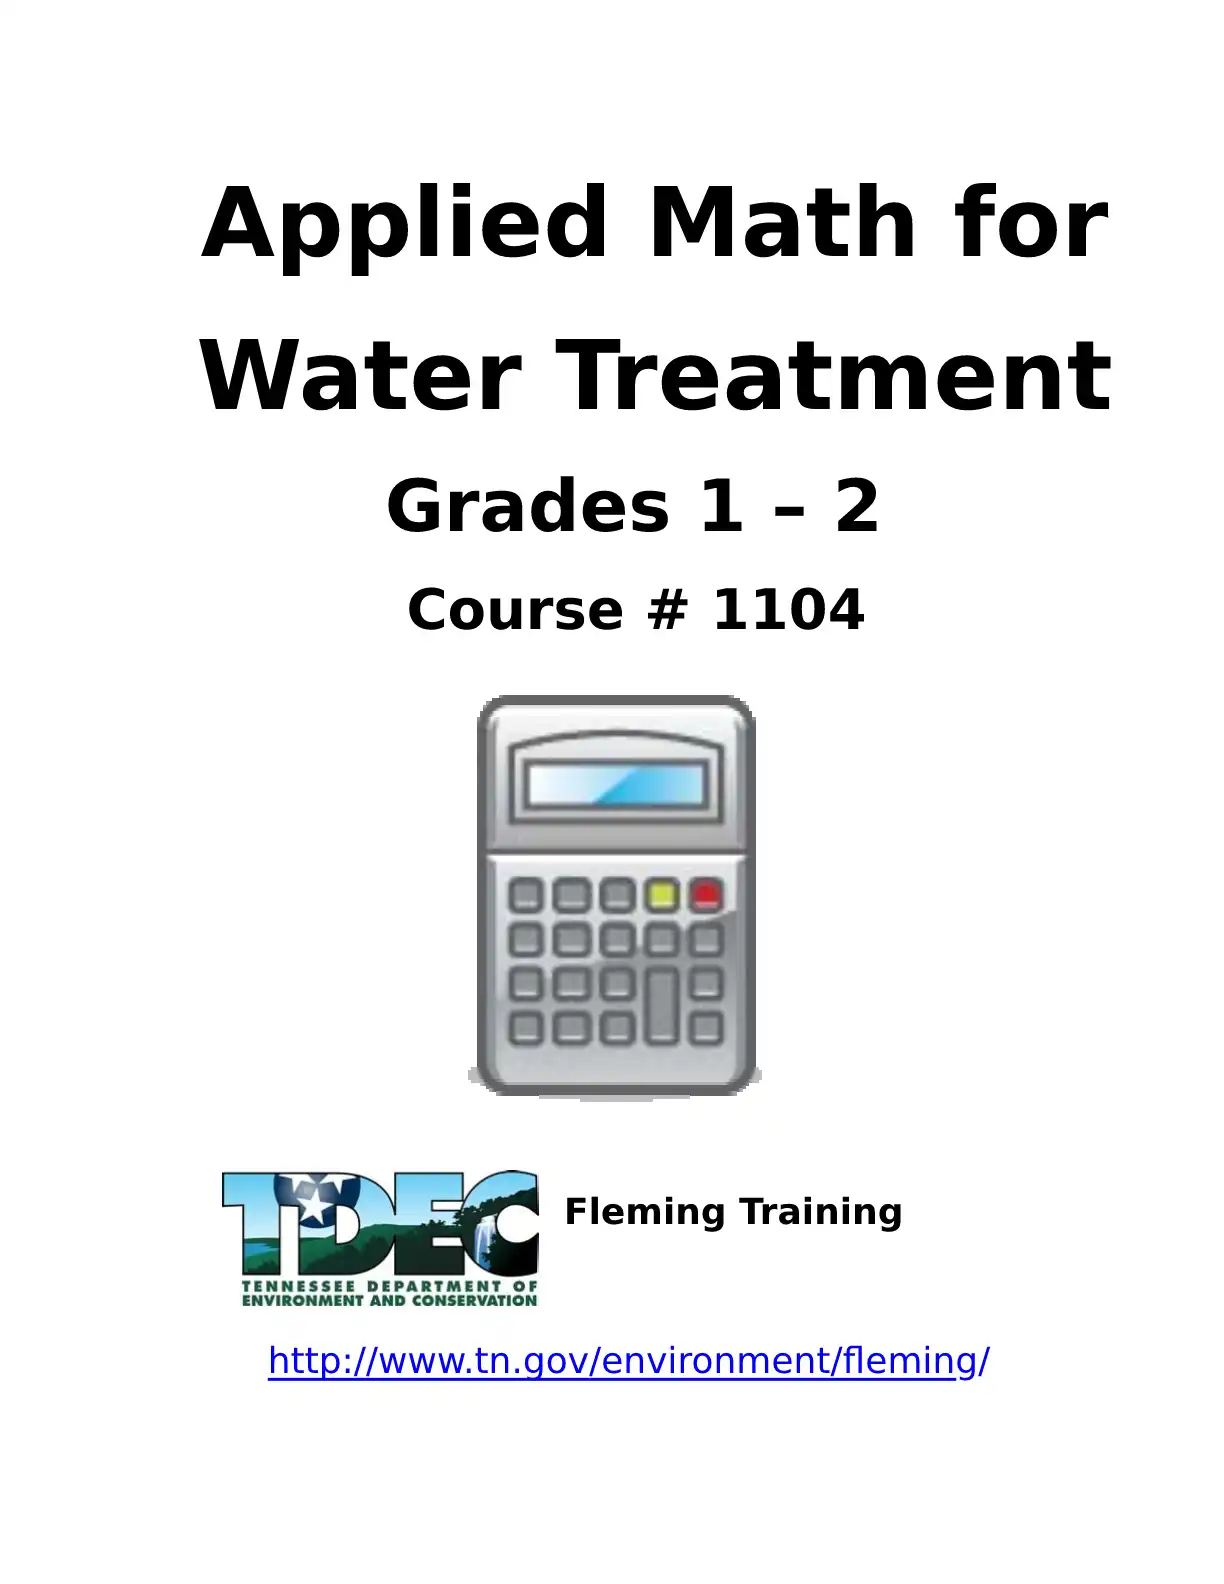 Applied Math for Water Treatment Grades 1 – 2